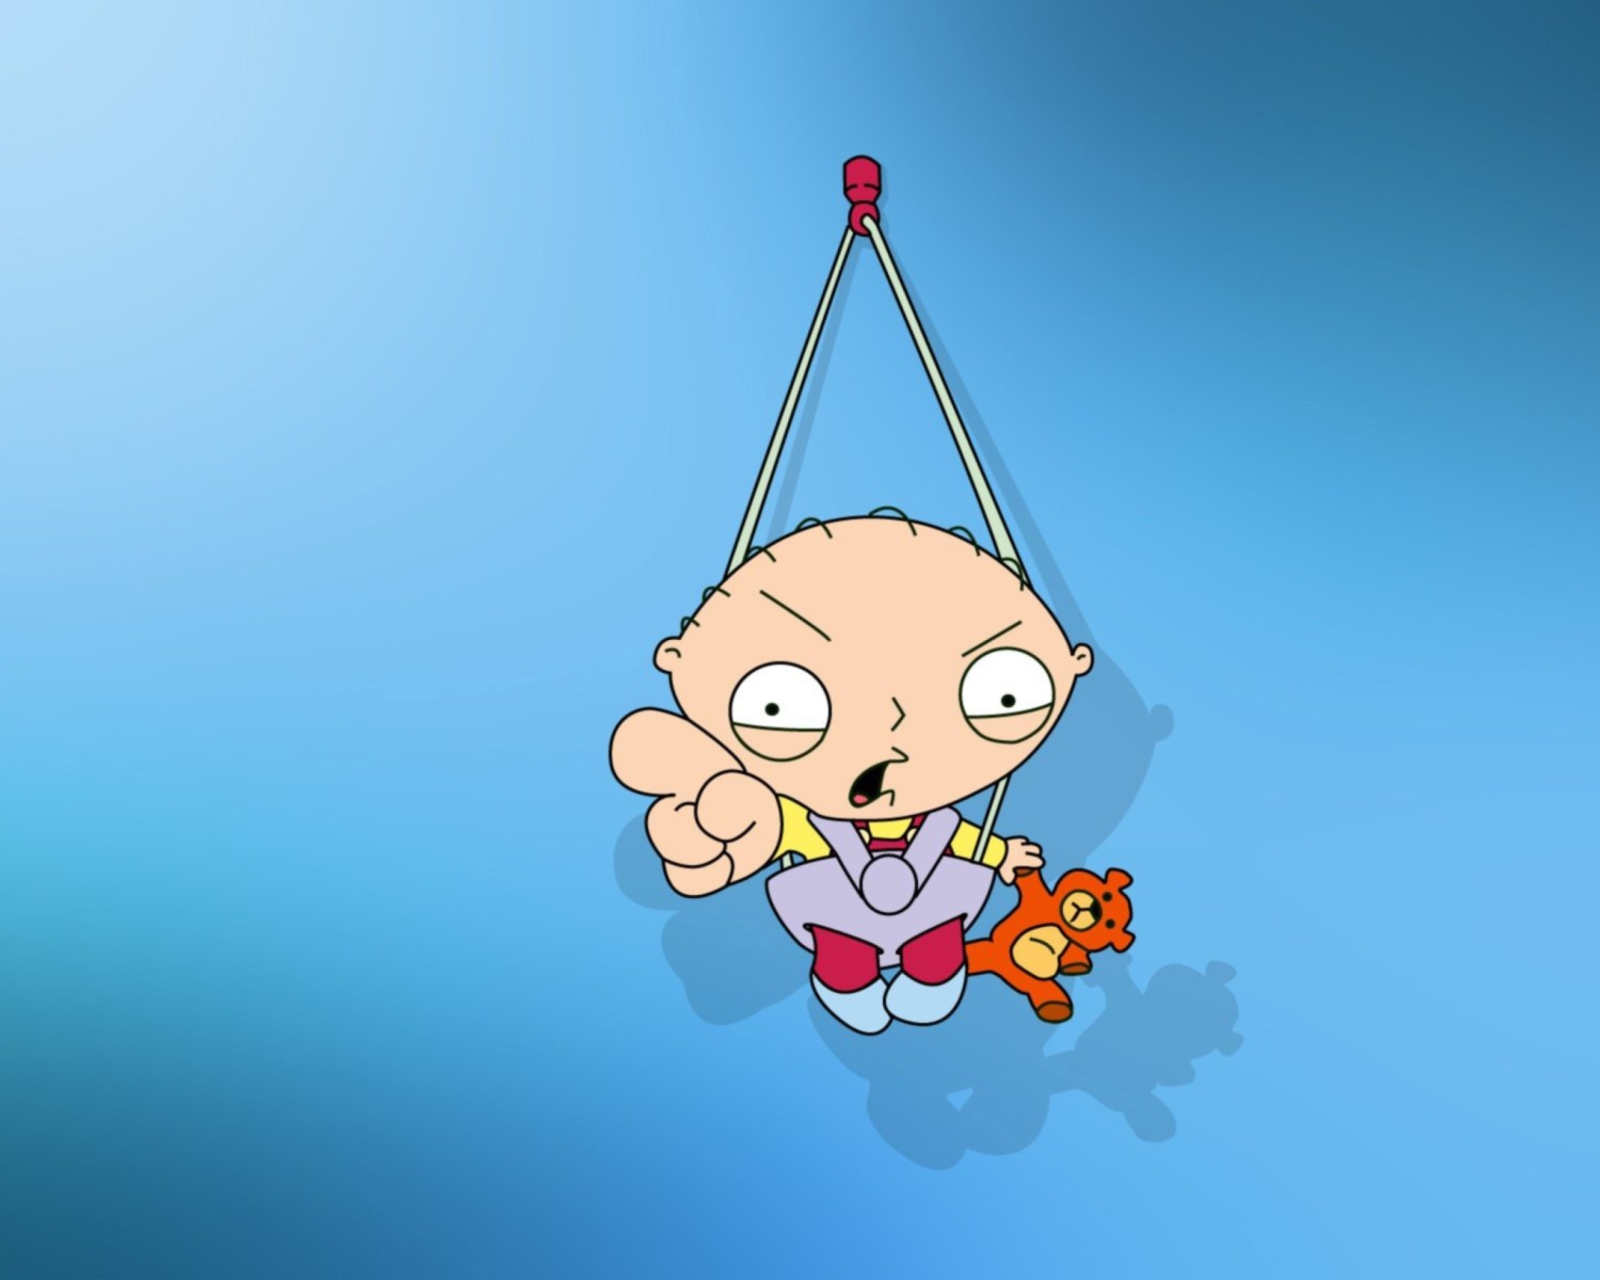 Funny Stewie From Family Guy wallpaper 1600x1280